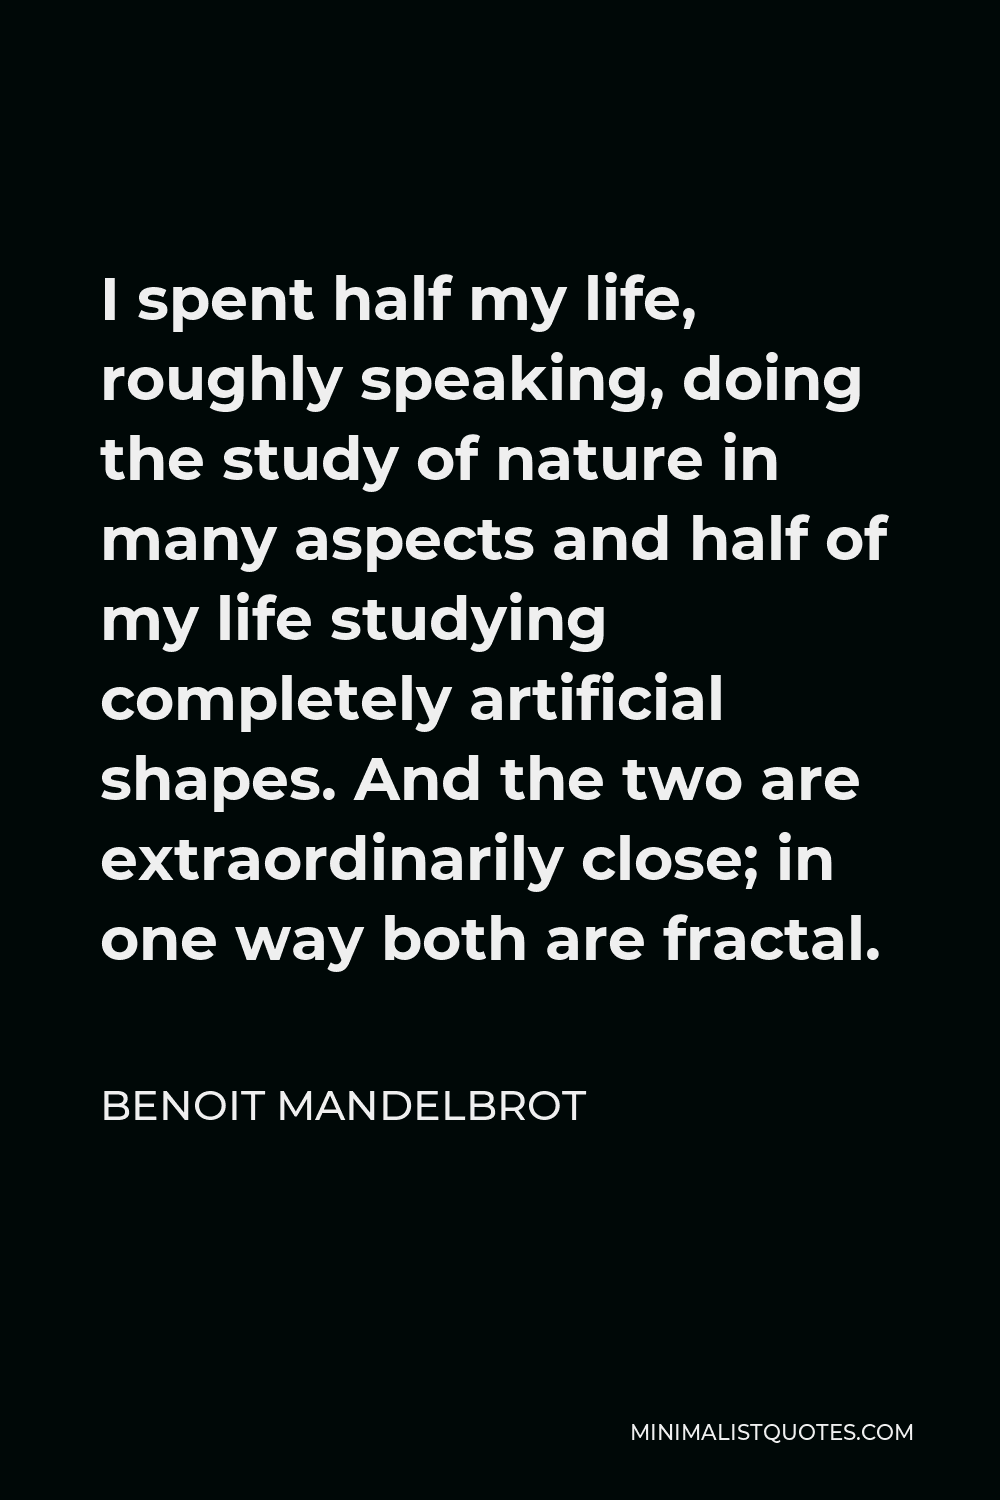 Benoit Mandelbrot Quote - I spent half my life, roughly speaking, doing the study of nature in many aspects and half of my life studying completely artificial shapes. And the two are extraordinarily close; in one way both are fractal.